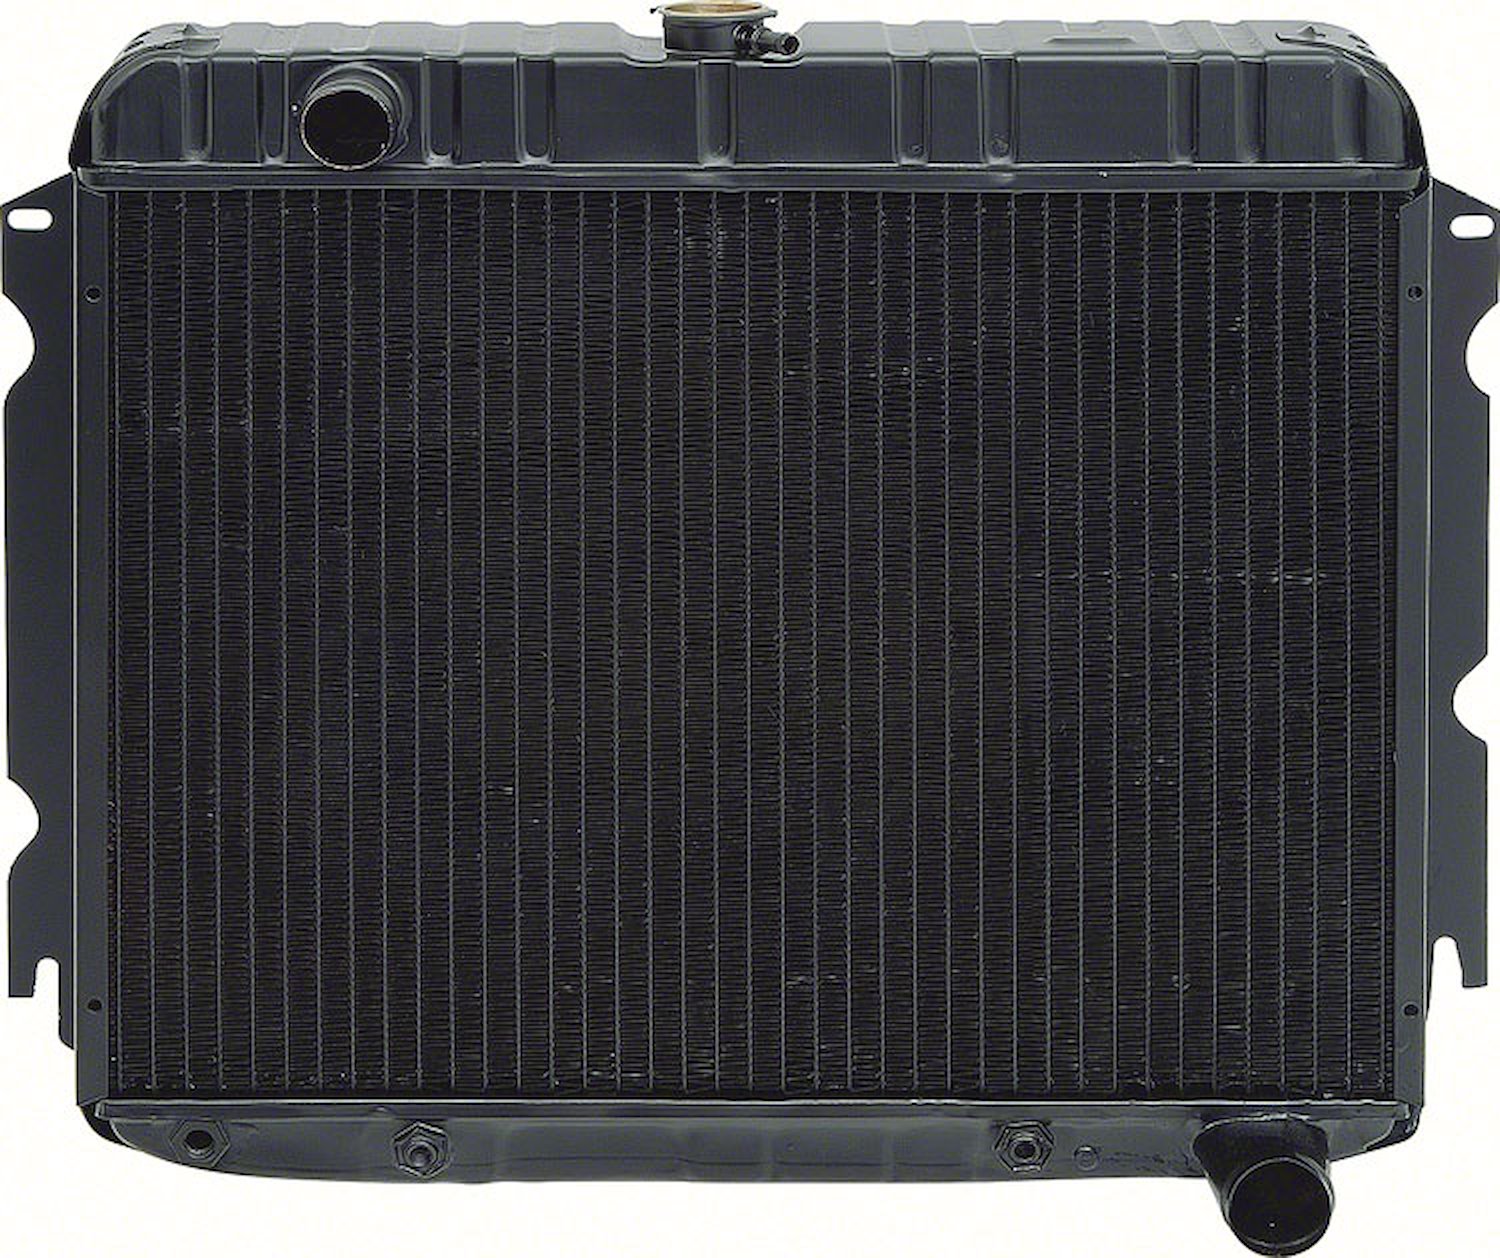 MA2262A Replacement Radiator 1973 Mopar A-Body With 6 Cylinder And Automatic Trans 4 Row